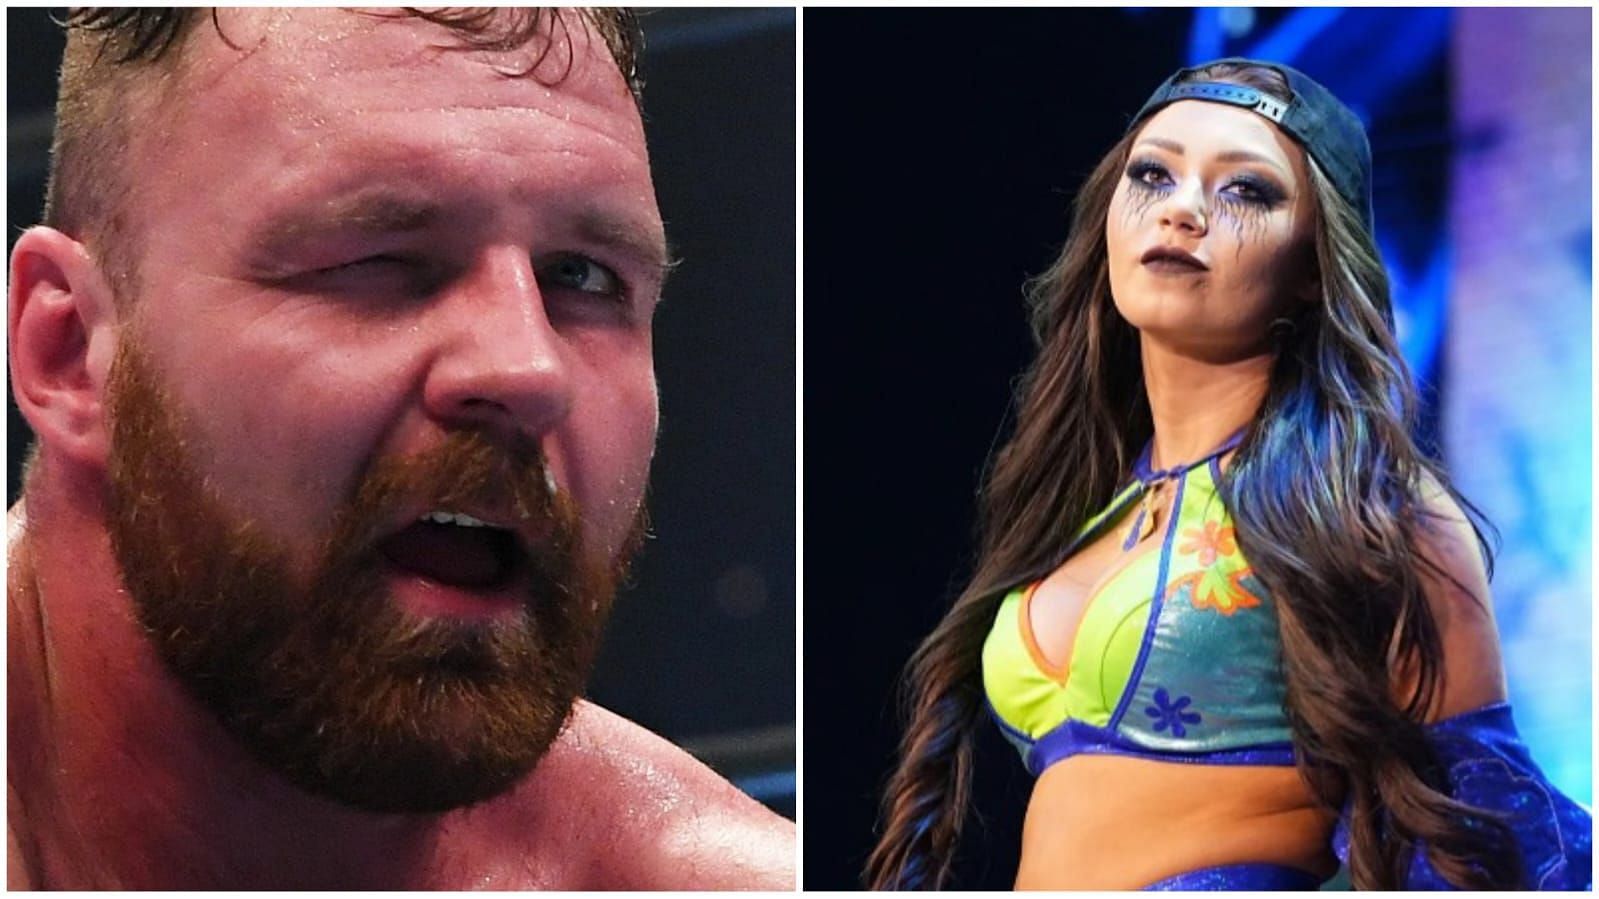 Jon Moxley and Skye Blue are currently signed with AEW